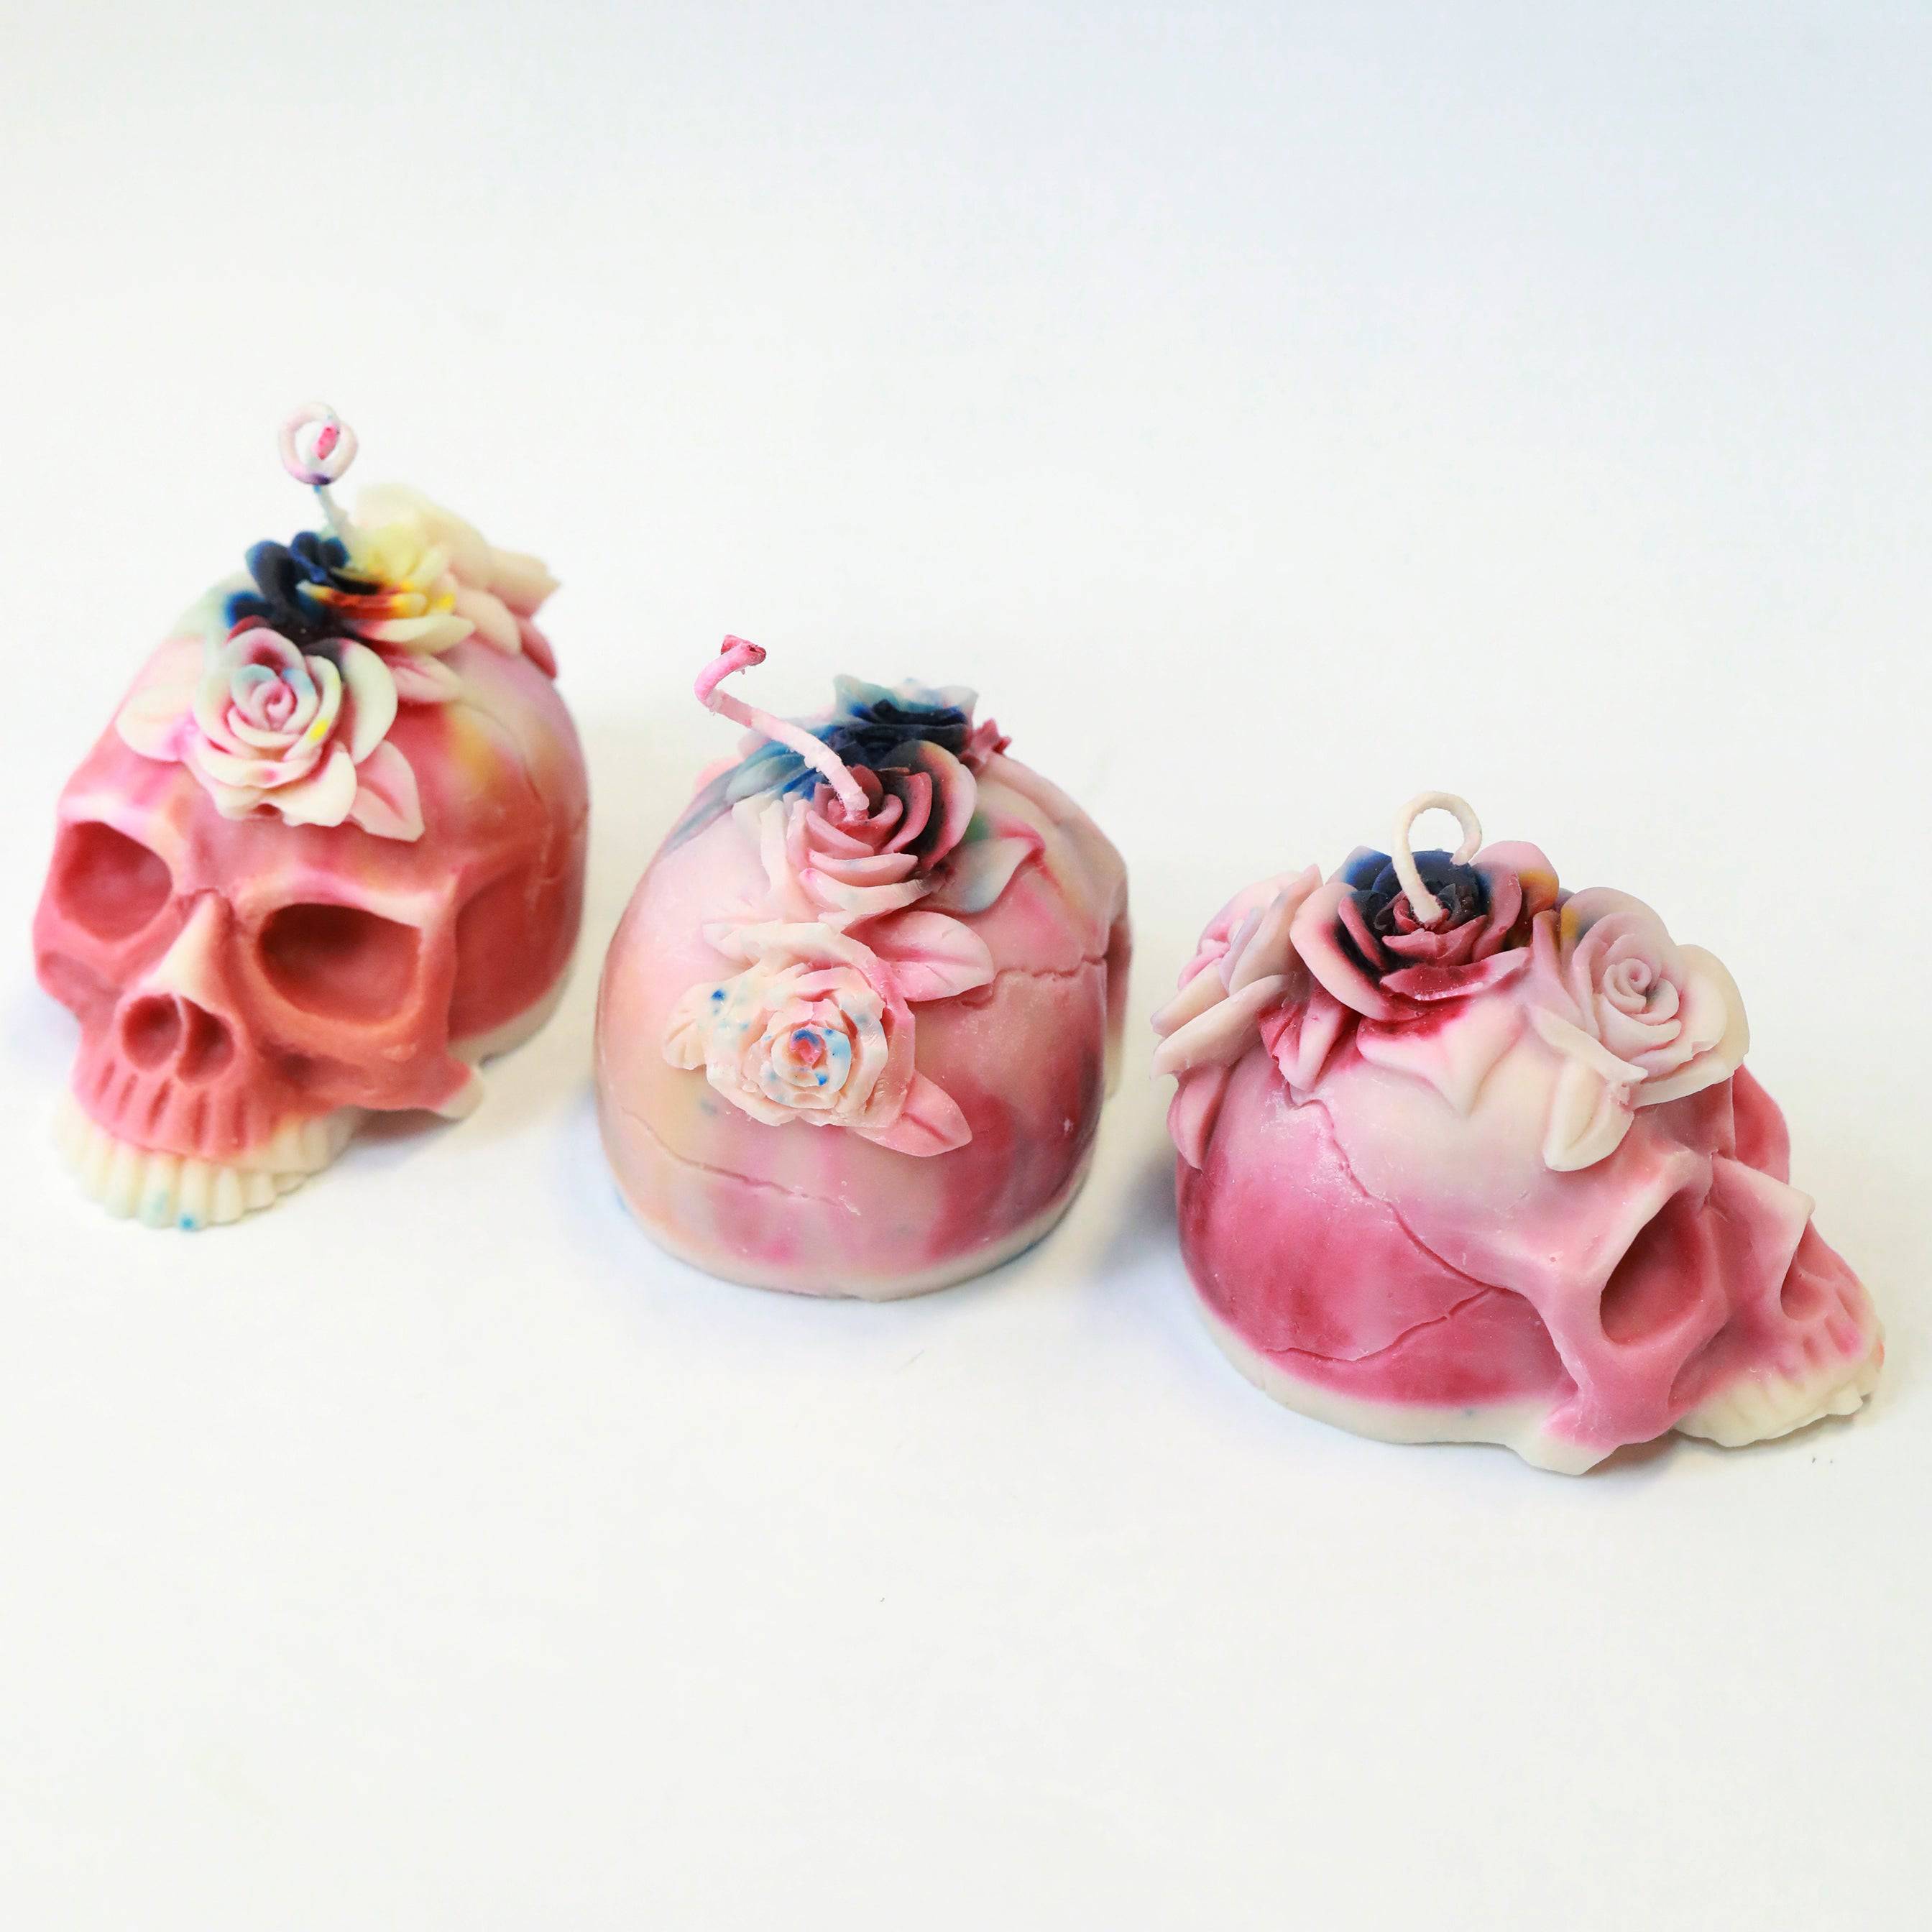 Shinigami Rainbow Skull Candle - The Gilded Witch